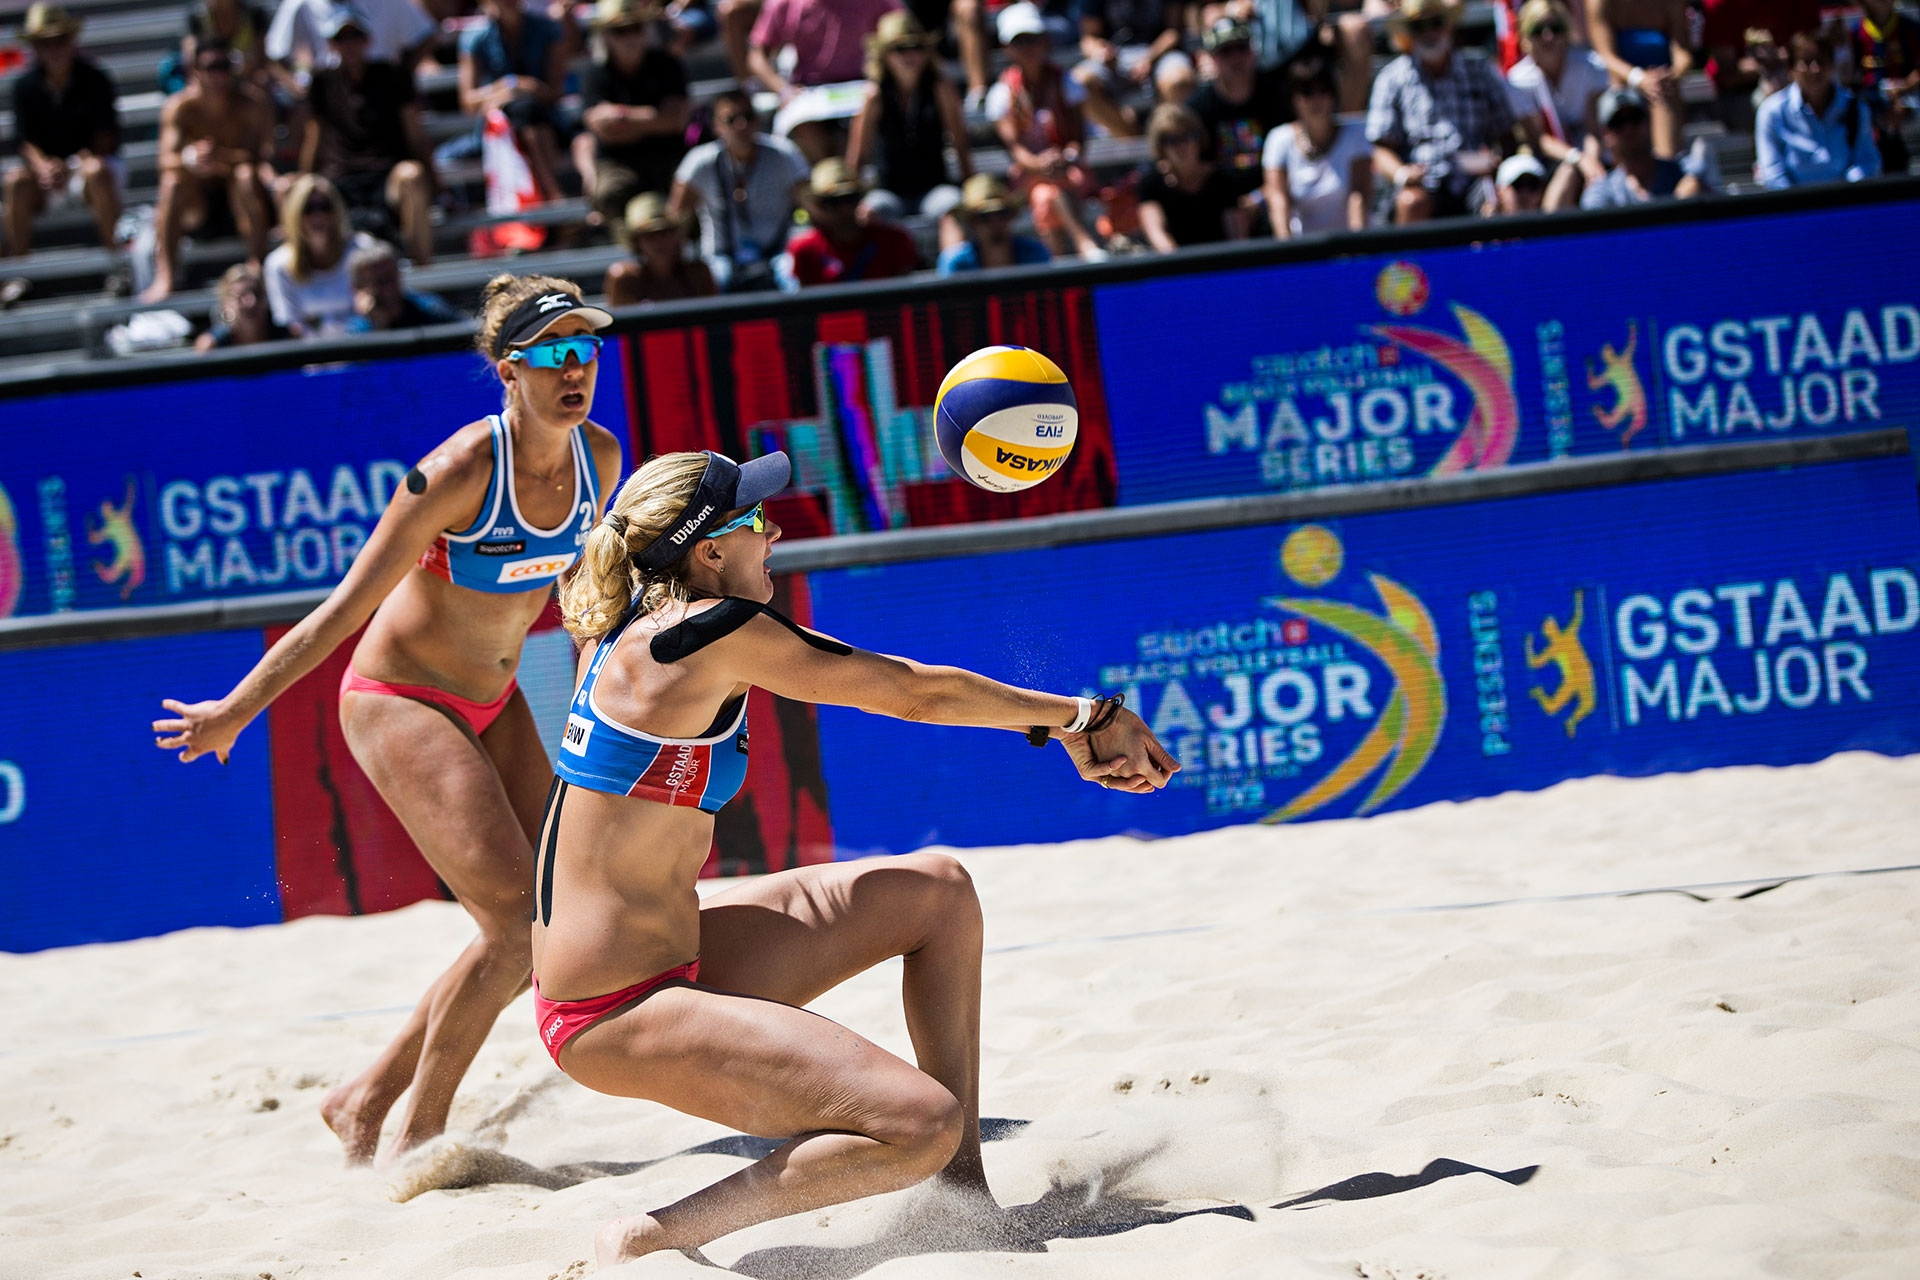 Kerri Walsh Jennings and April Ross have now won three golds in their last five tournaments this year. Photo credit: Samo Vidic